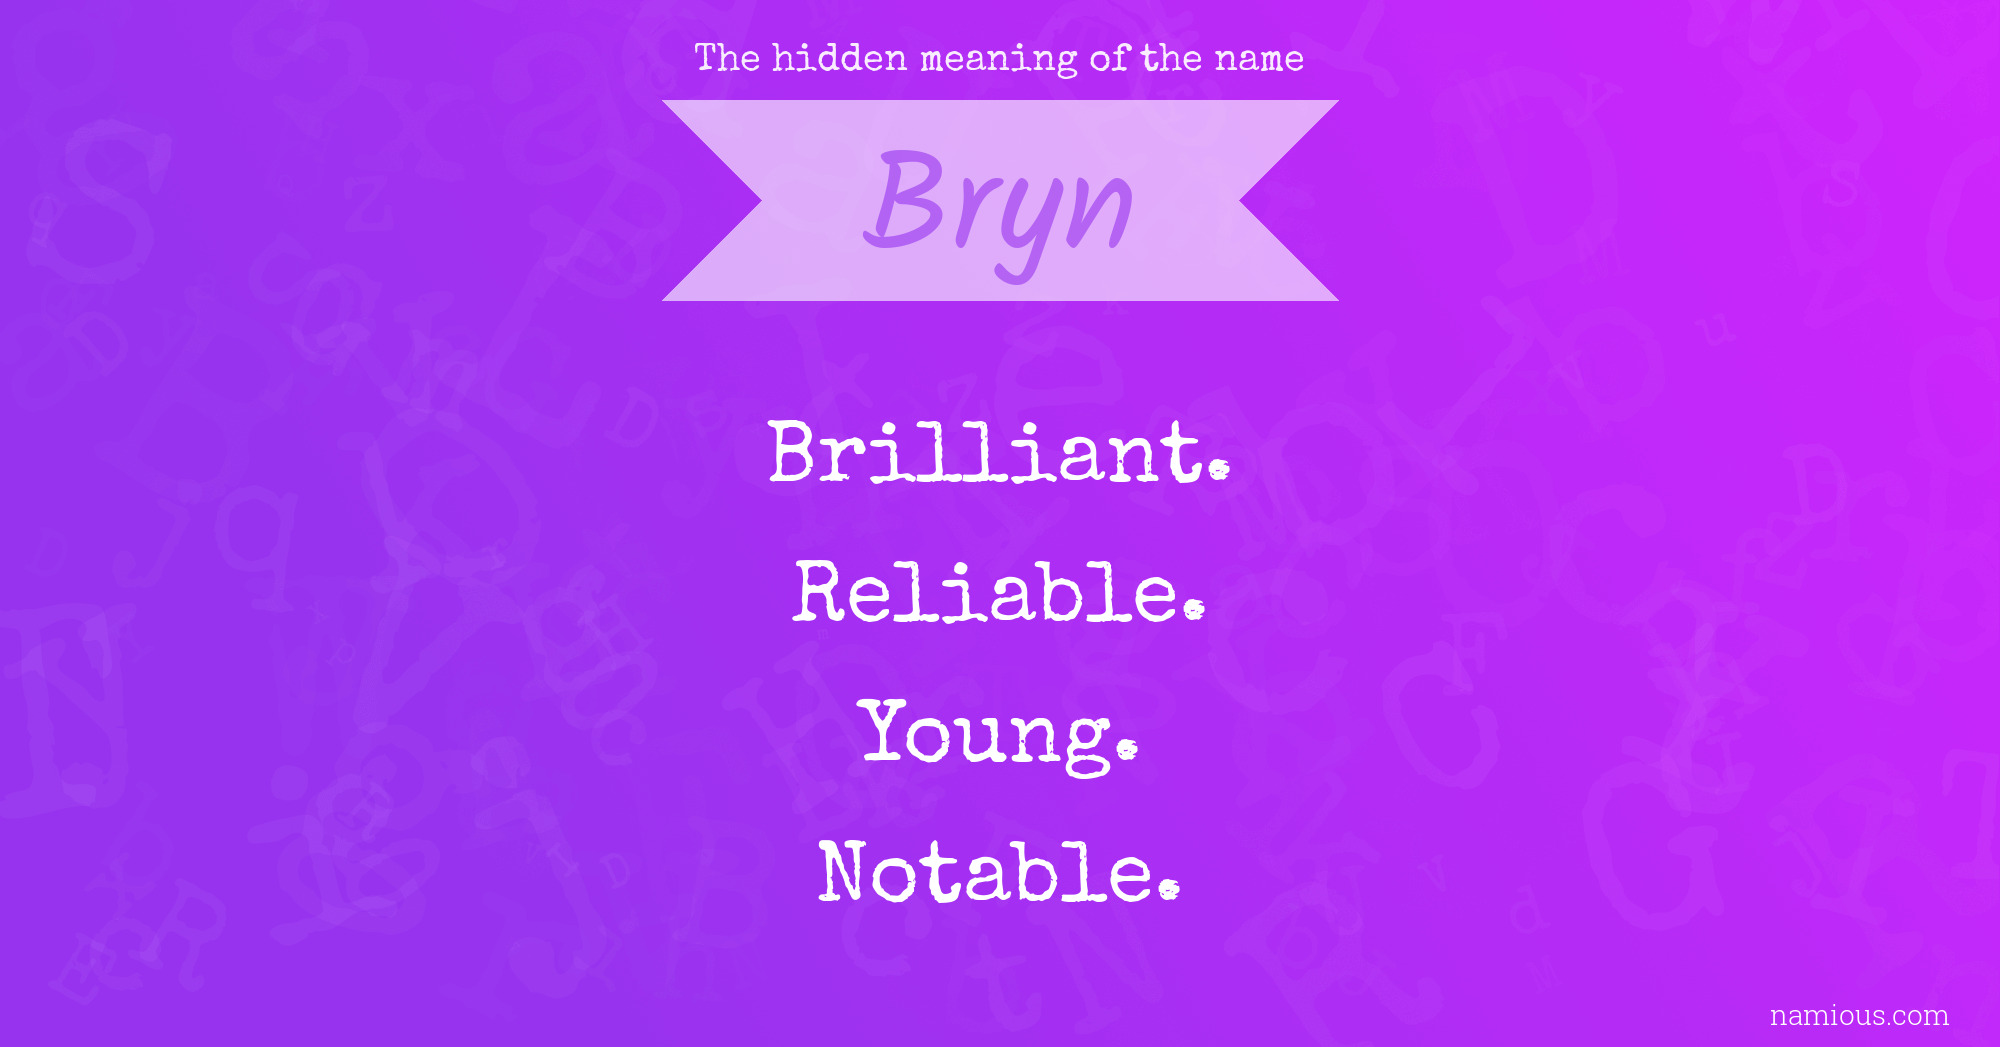 The hidden meaning of the name Bryn